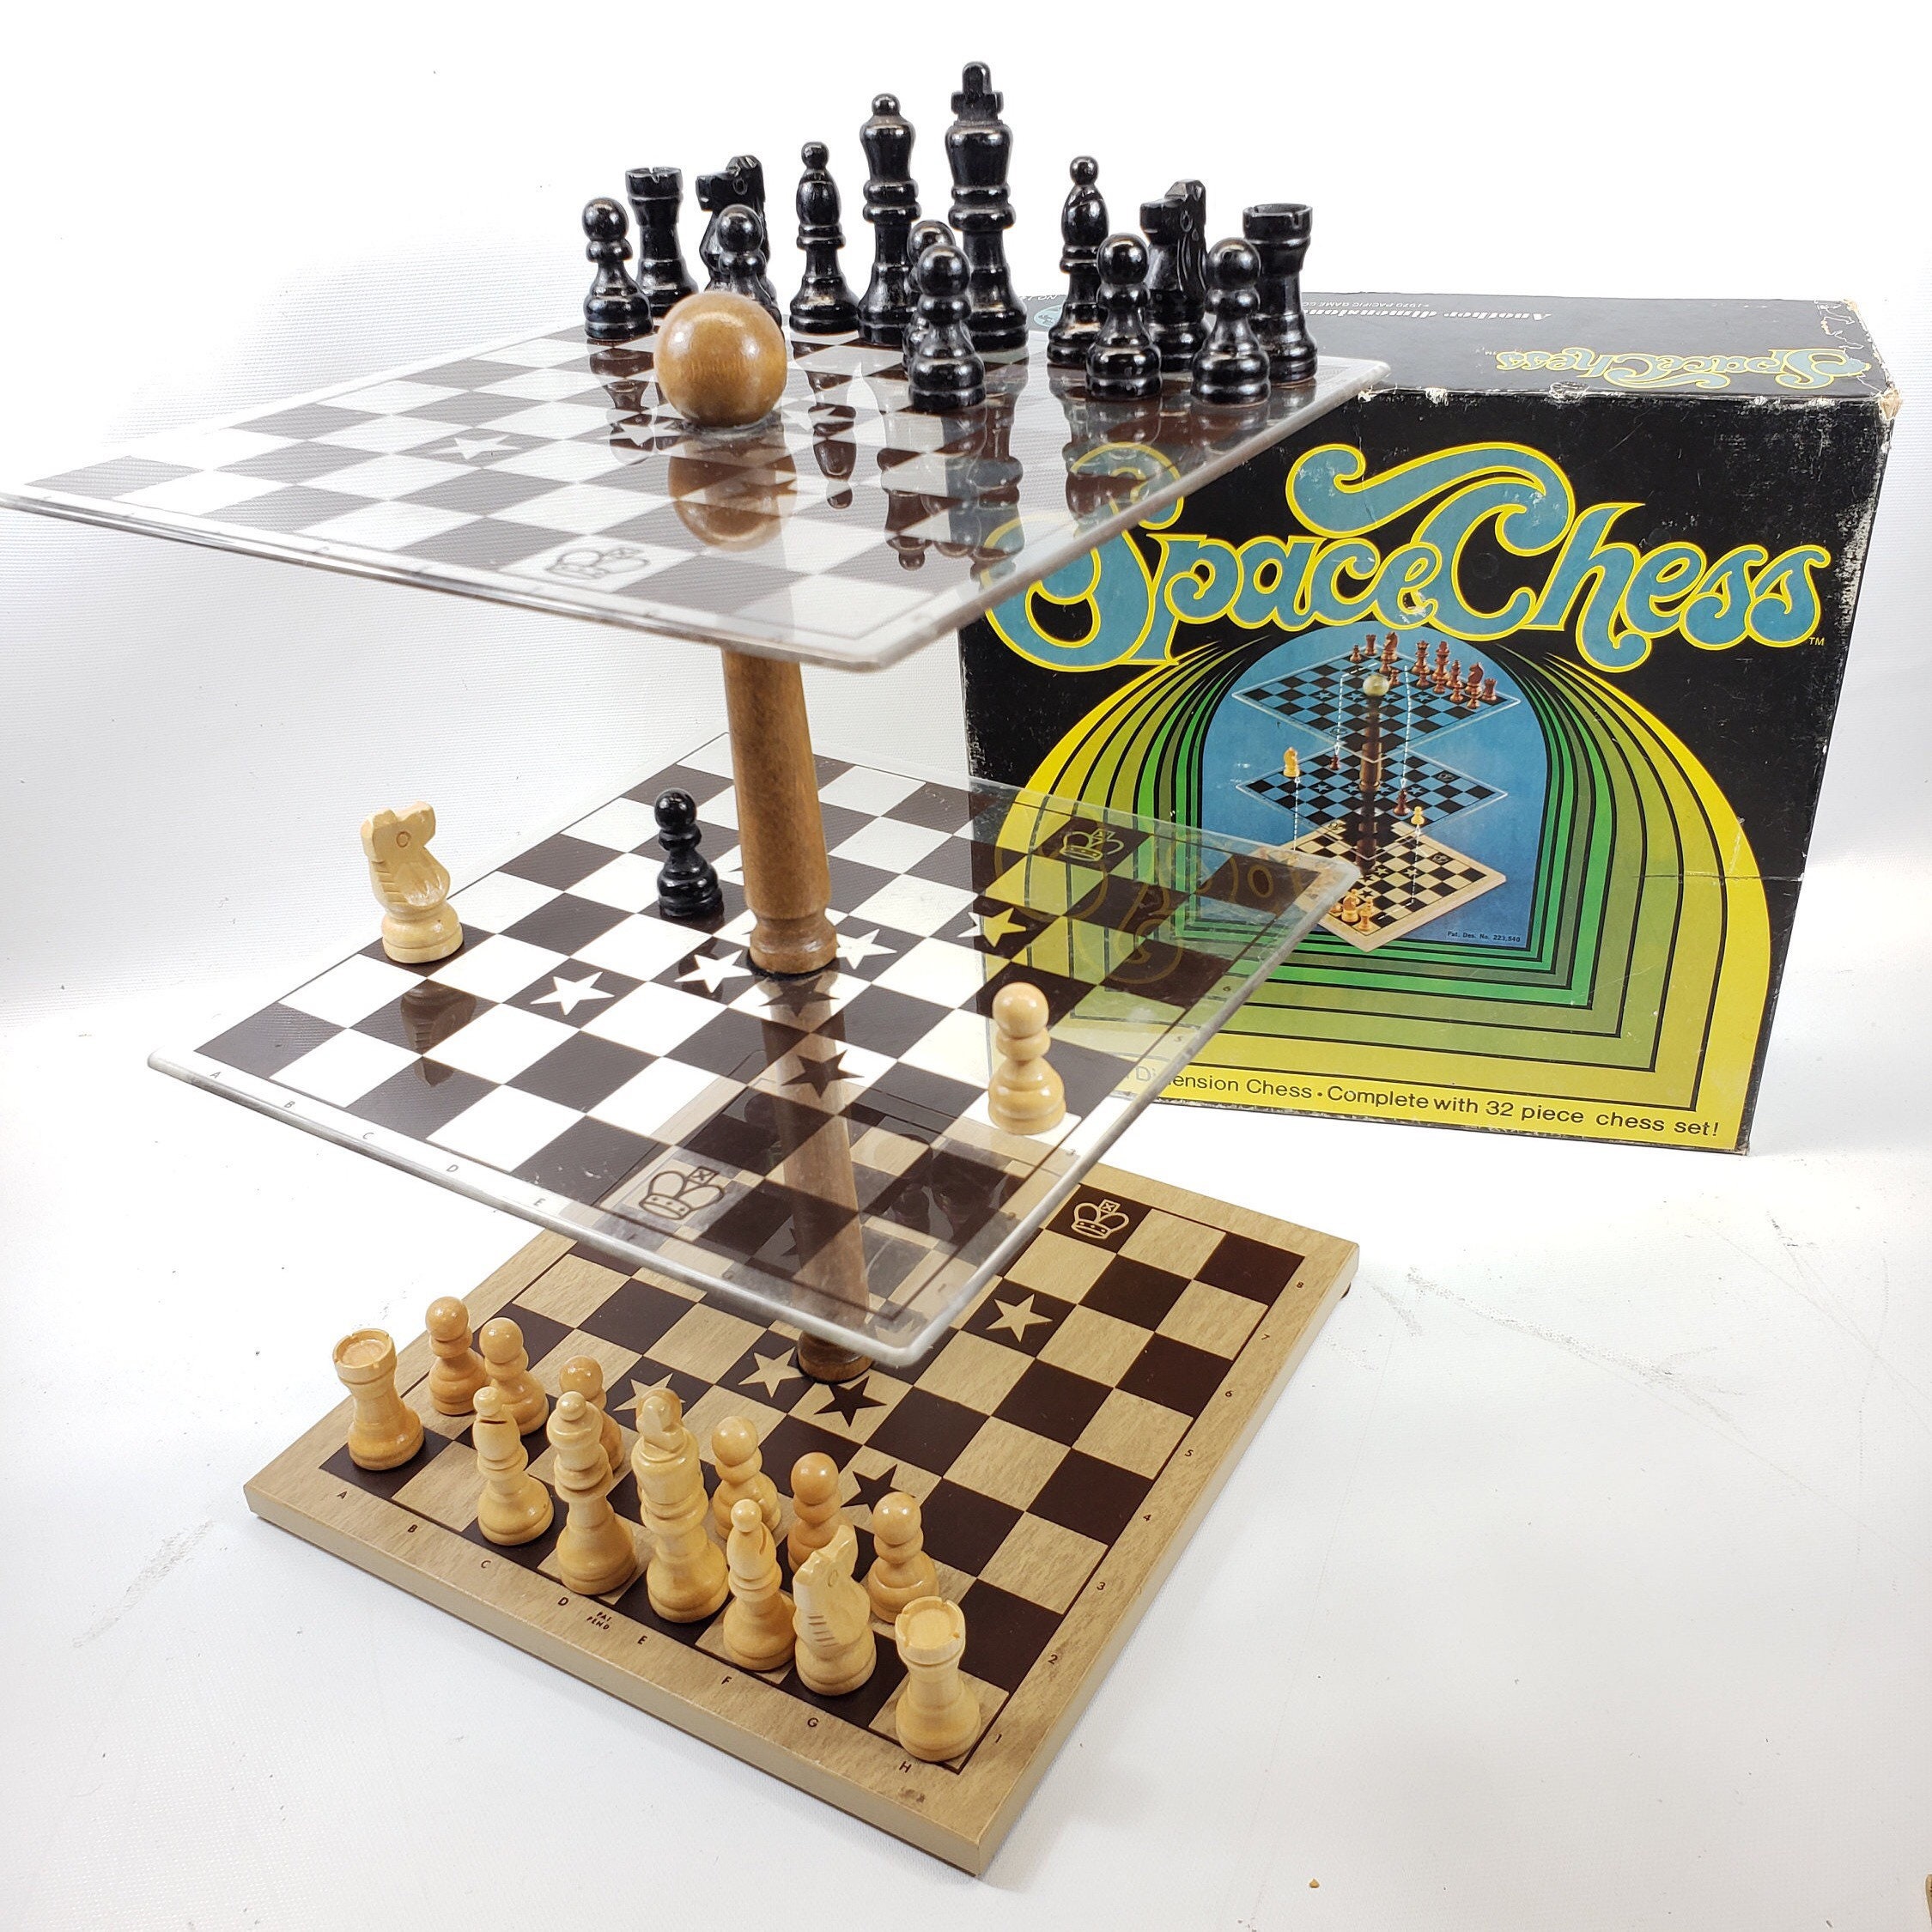  Paco Sako Peace Chess Game, Super Fun for Chess Lovers, Make  Peace While Playing Chess Foe 2 players, not War - Board Game for Peace  Makers : Toys & Games